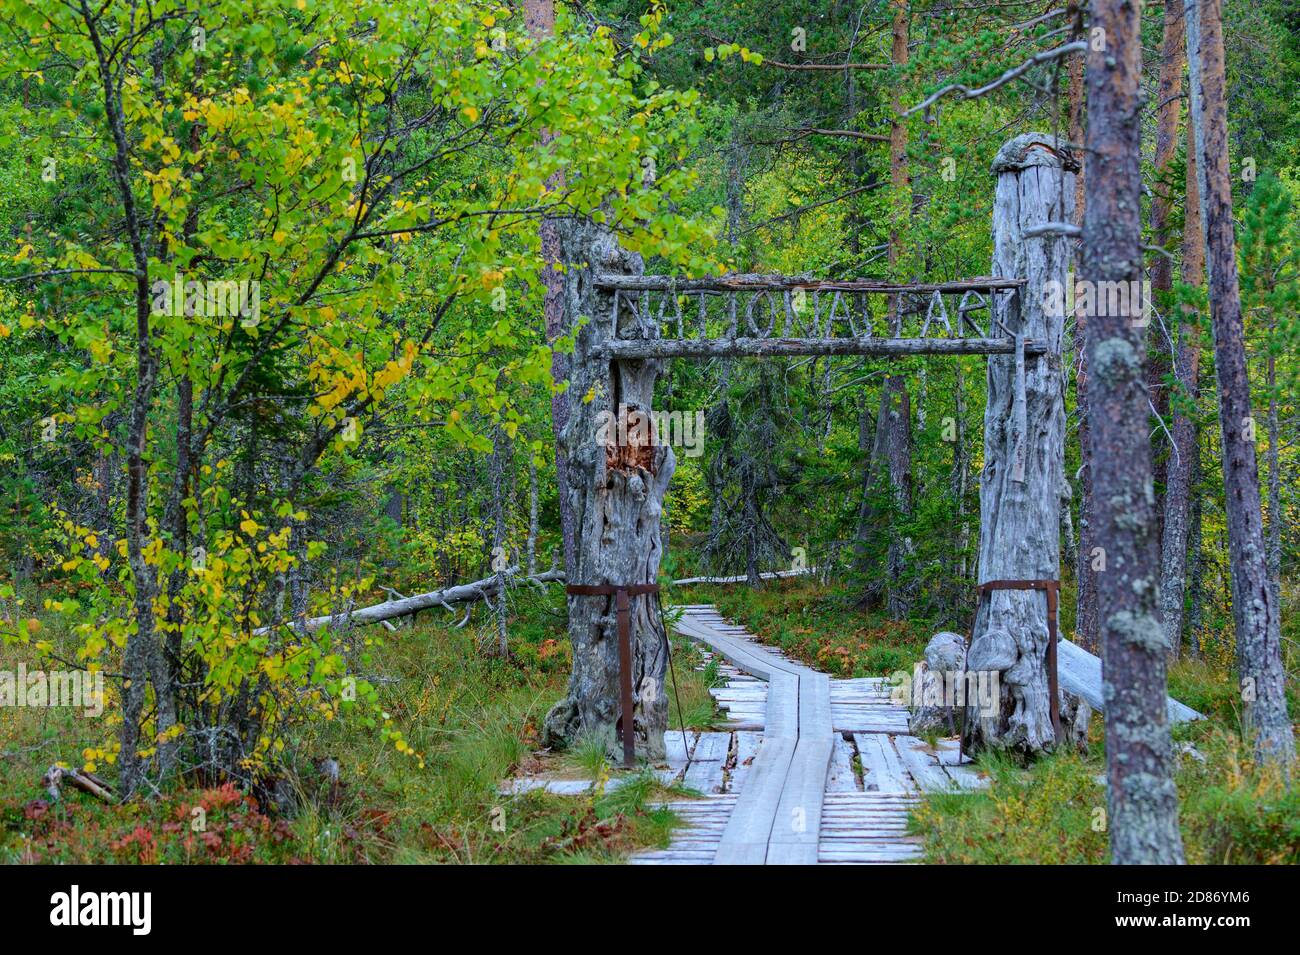 Wooden gate and boardwalk in an autumn forest in Hamra National Park, Sweden Stock Photo